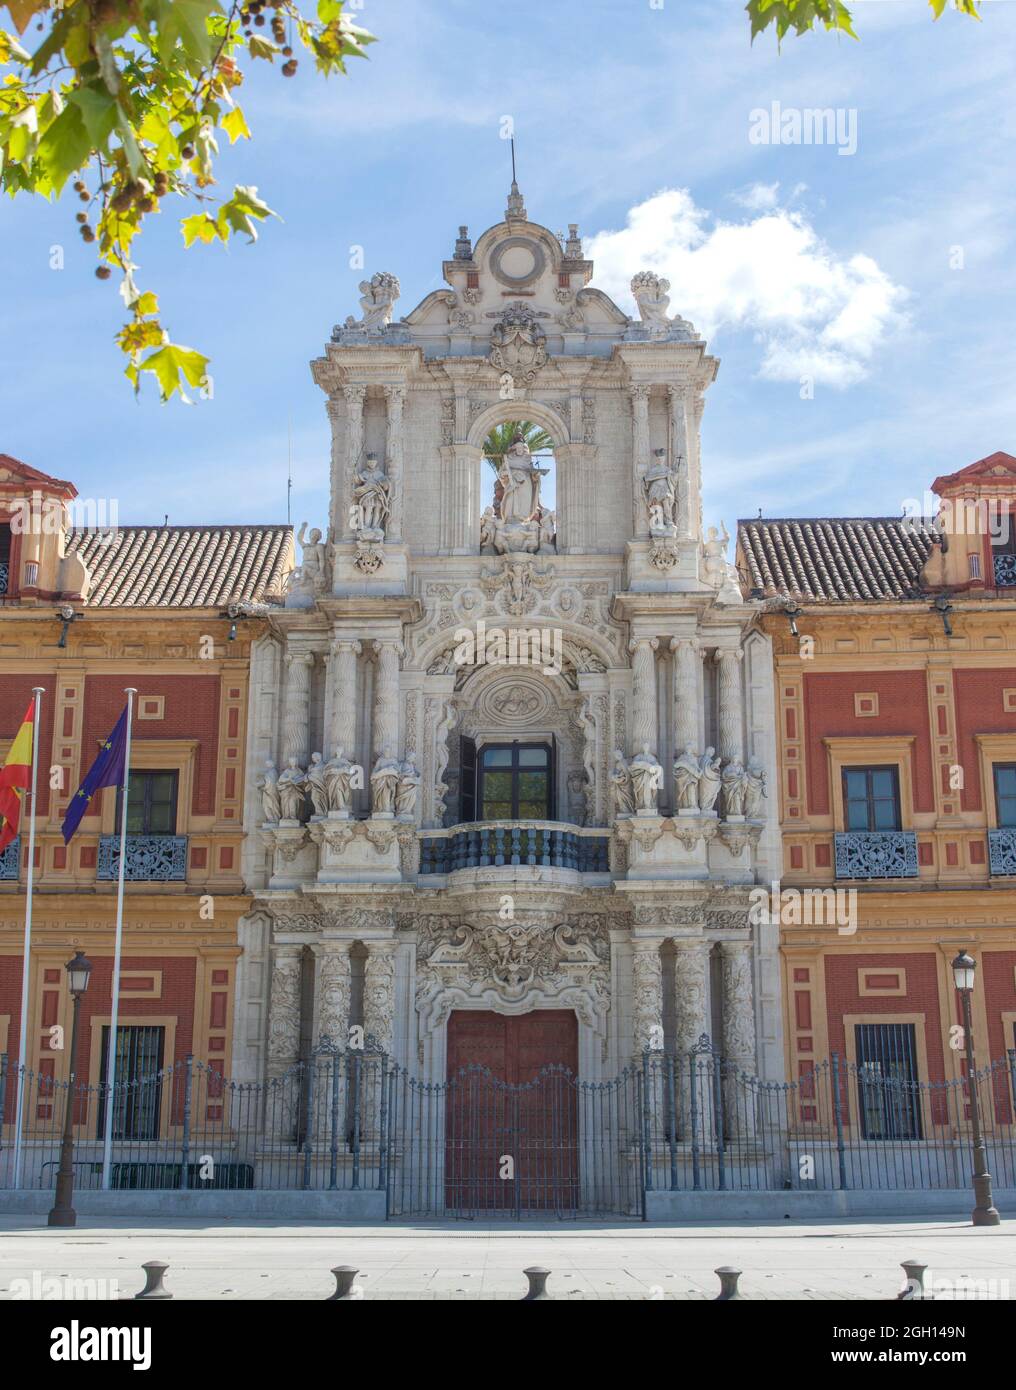 The Palace of San Telmo Seville, Spain. Seat of the presidency of the Andalusian Regional Government. Stock Photo